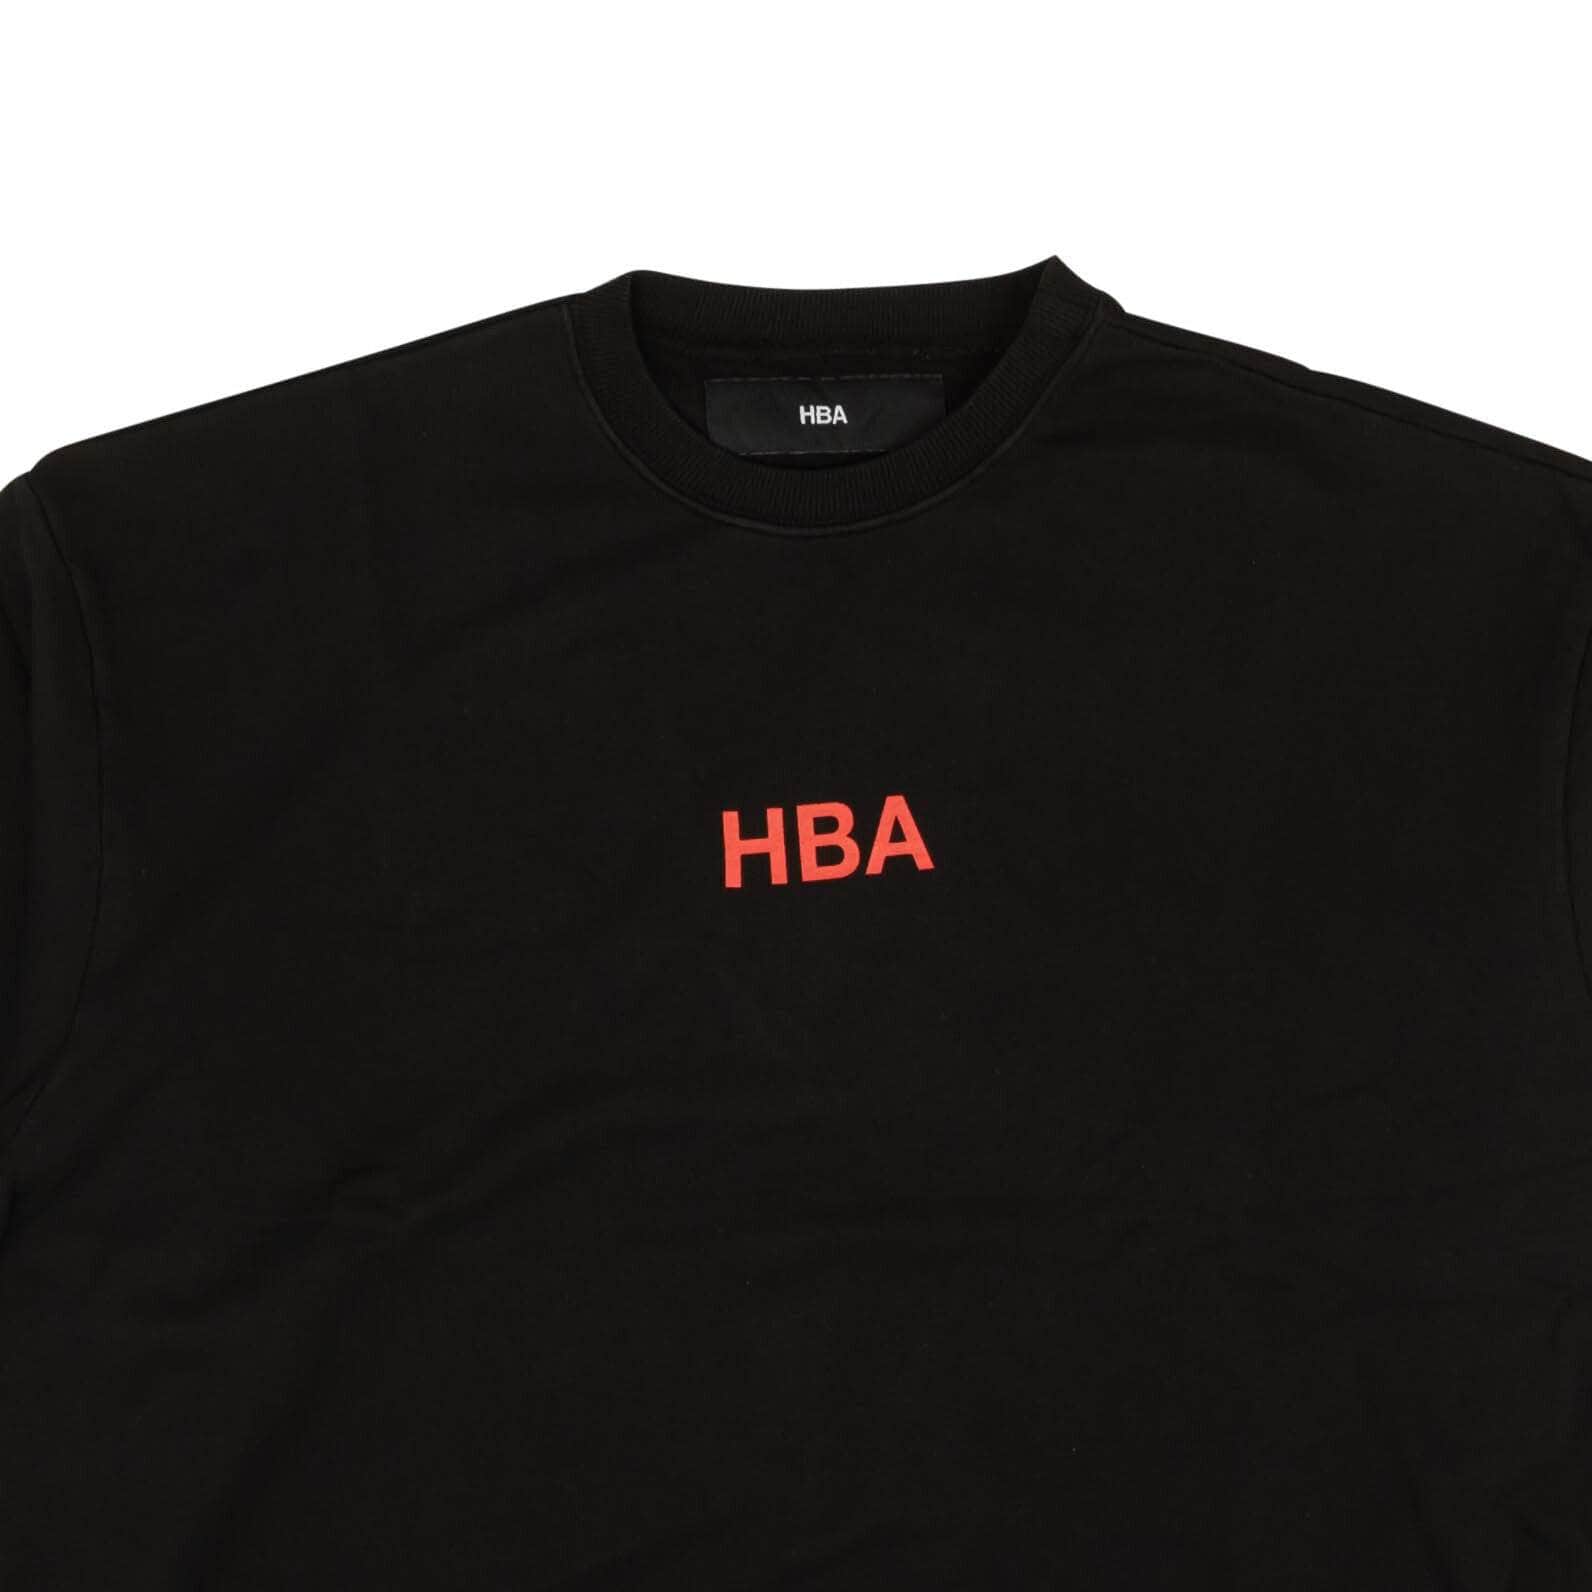 Hood By Air channelenable-all, chicmi, couponcollection, gender-mens, hood-by-air, main-clothing, mens-shoes, MixedApparel, size-l, size-m, size-s, size-xl, under-250 Black Patches Red Logo Crewneck Sweatshirt